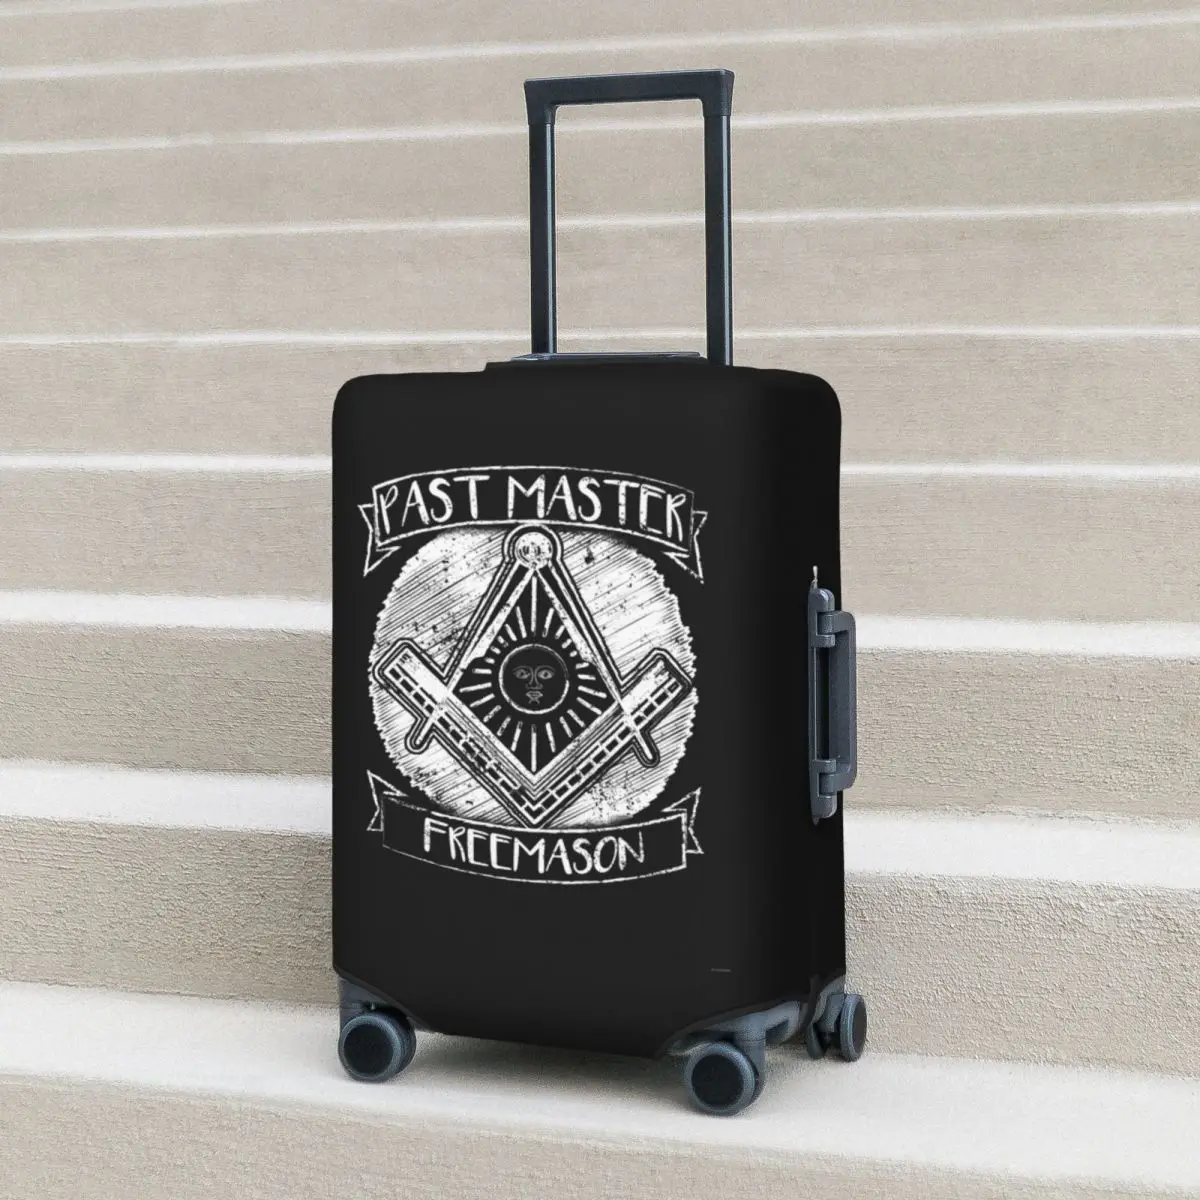 

Freemason Suitcase Cover Square and Compass Fashion Travel Flight Elastic Luggage Case Protector